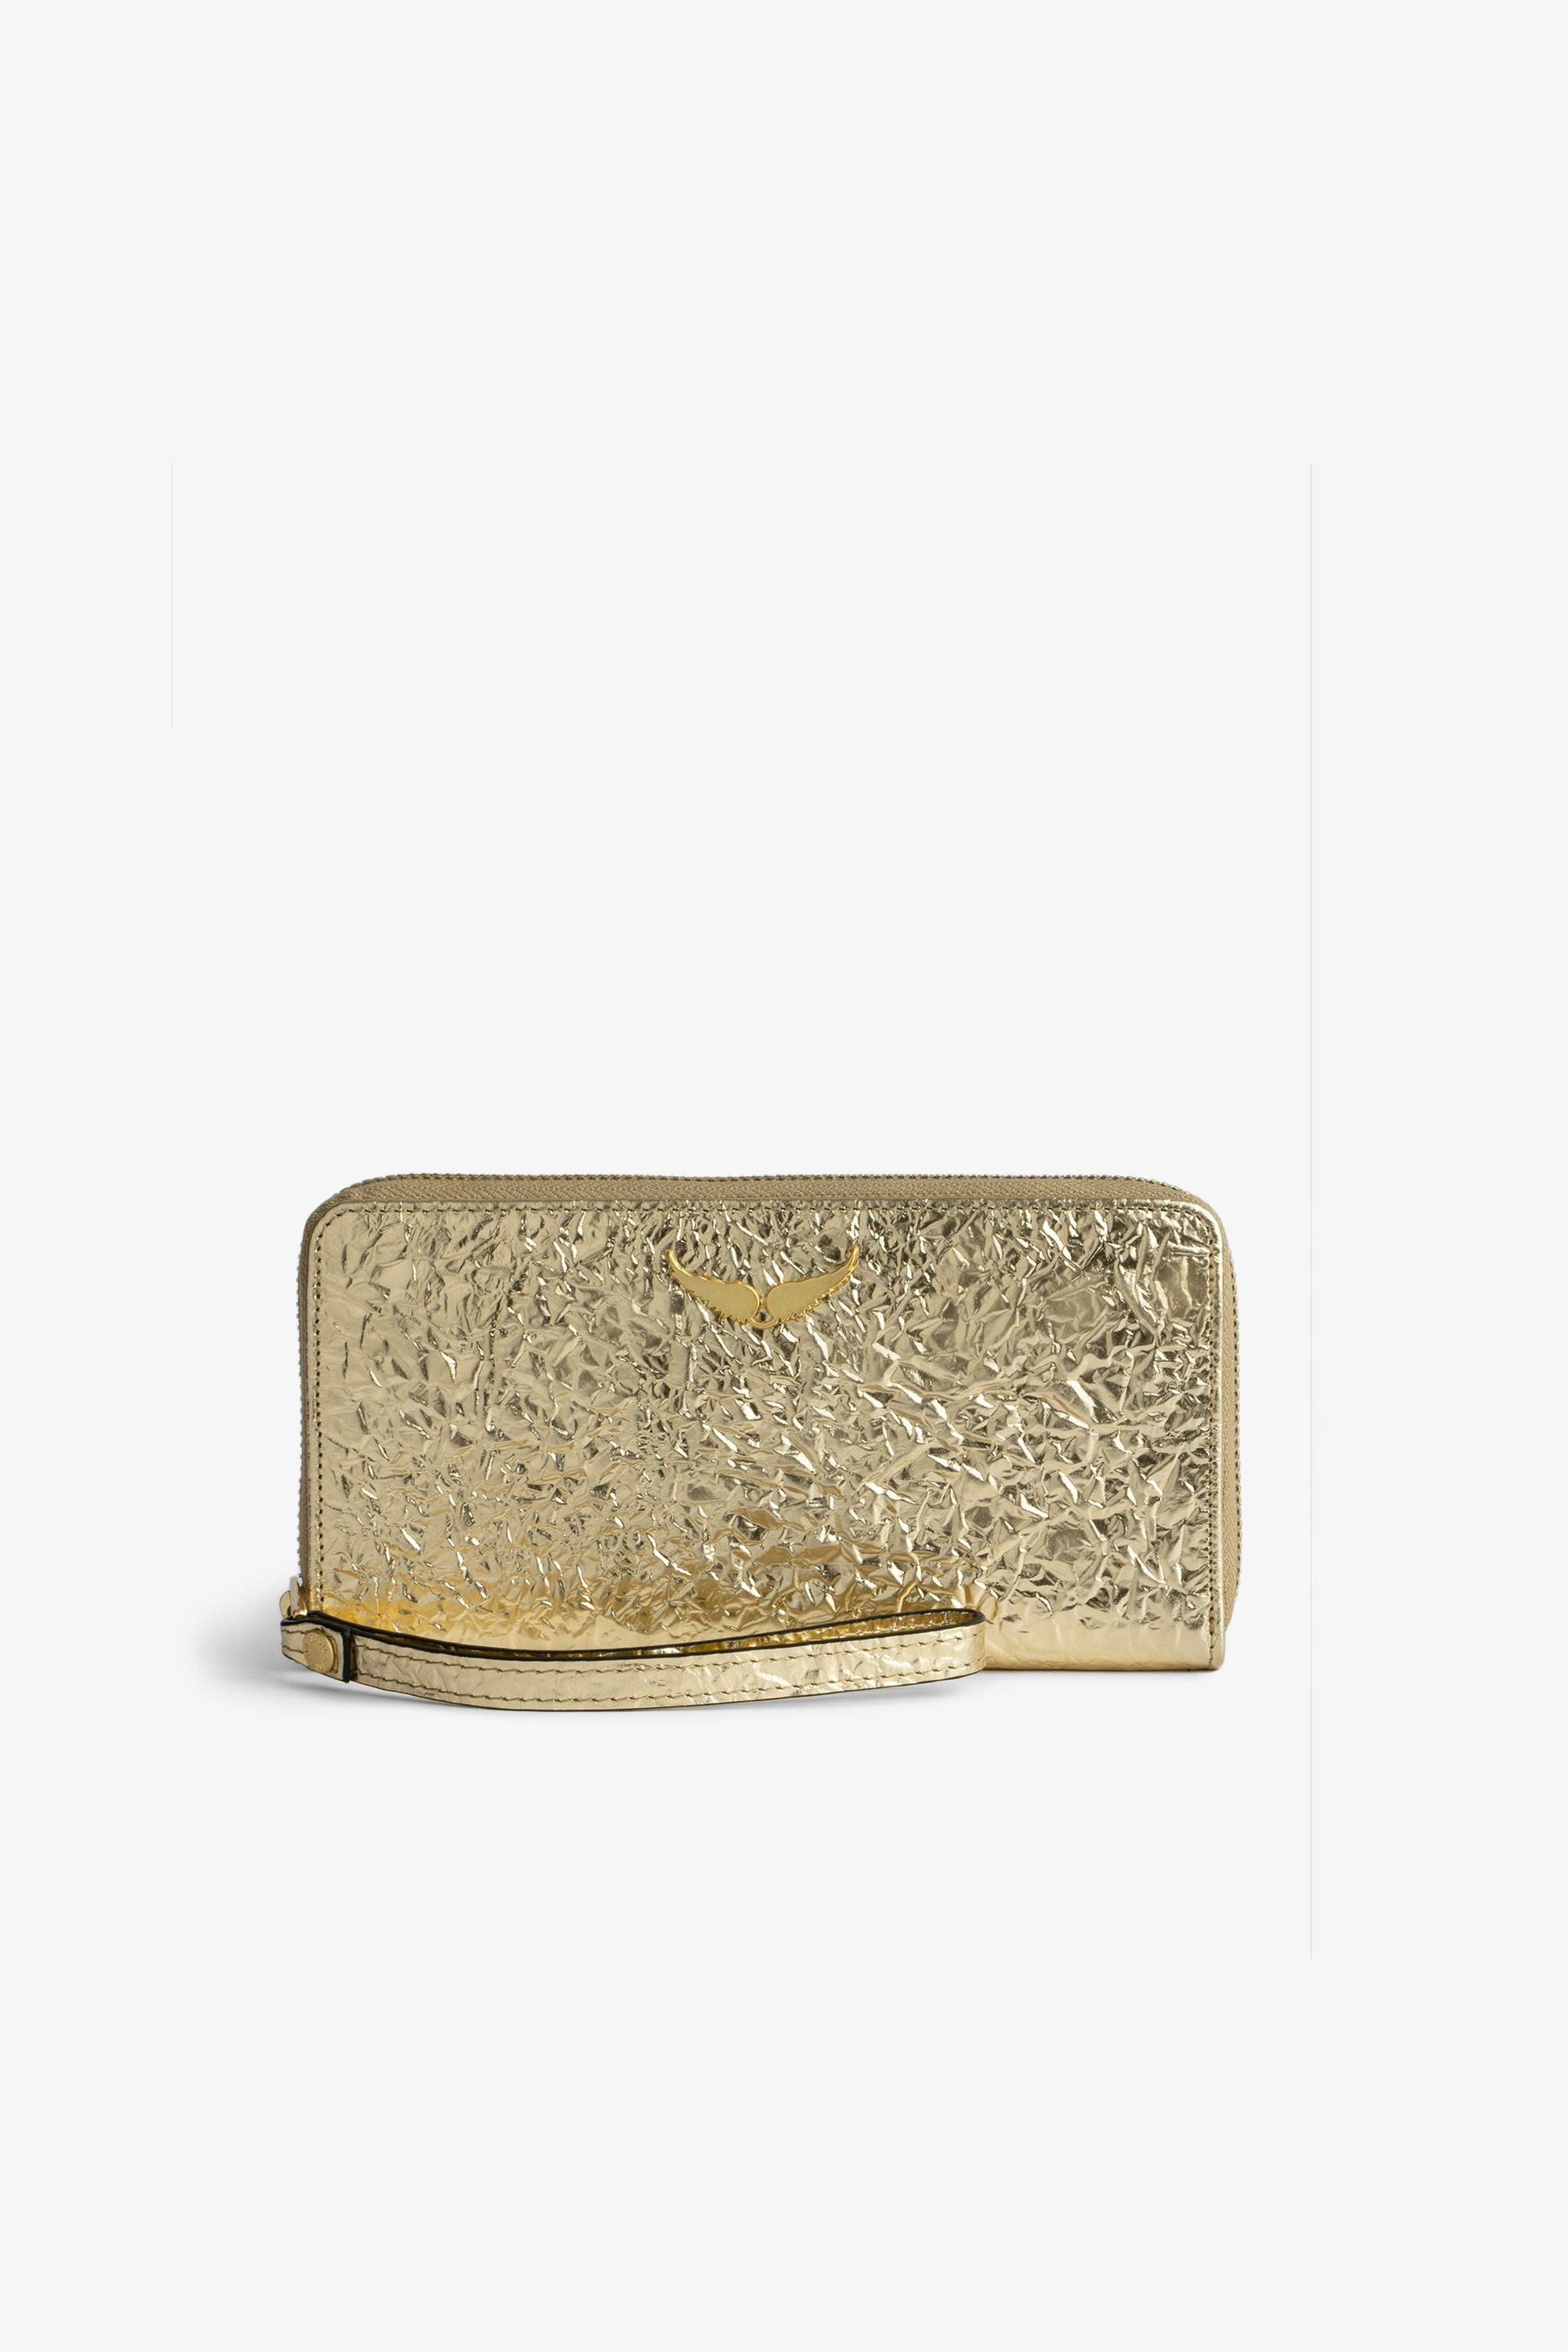 Compagnon Wallet Women’s metallic gold crinkled leather Compagnon wallet